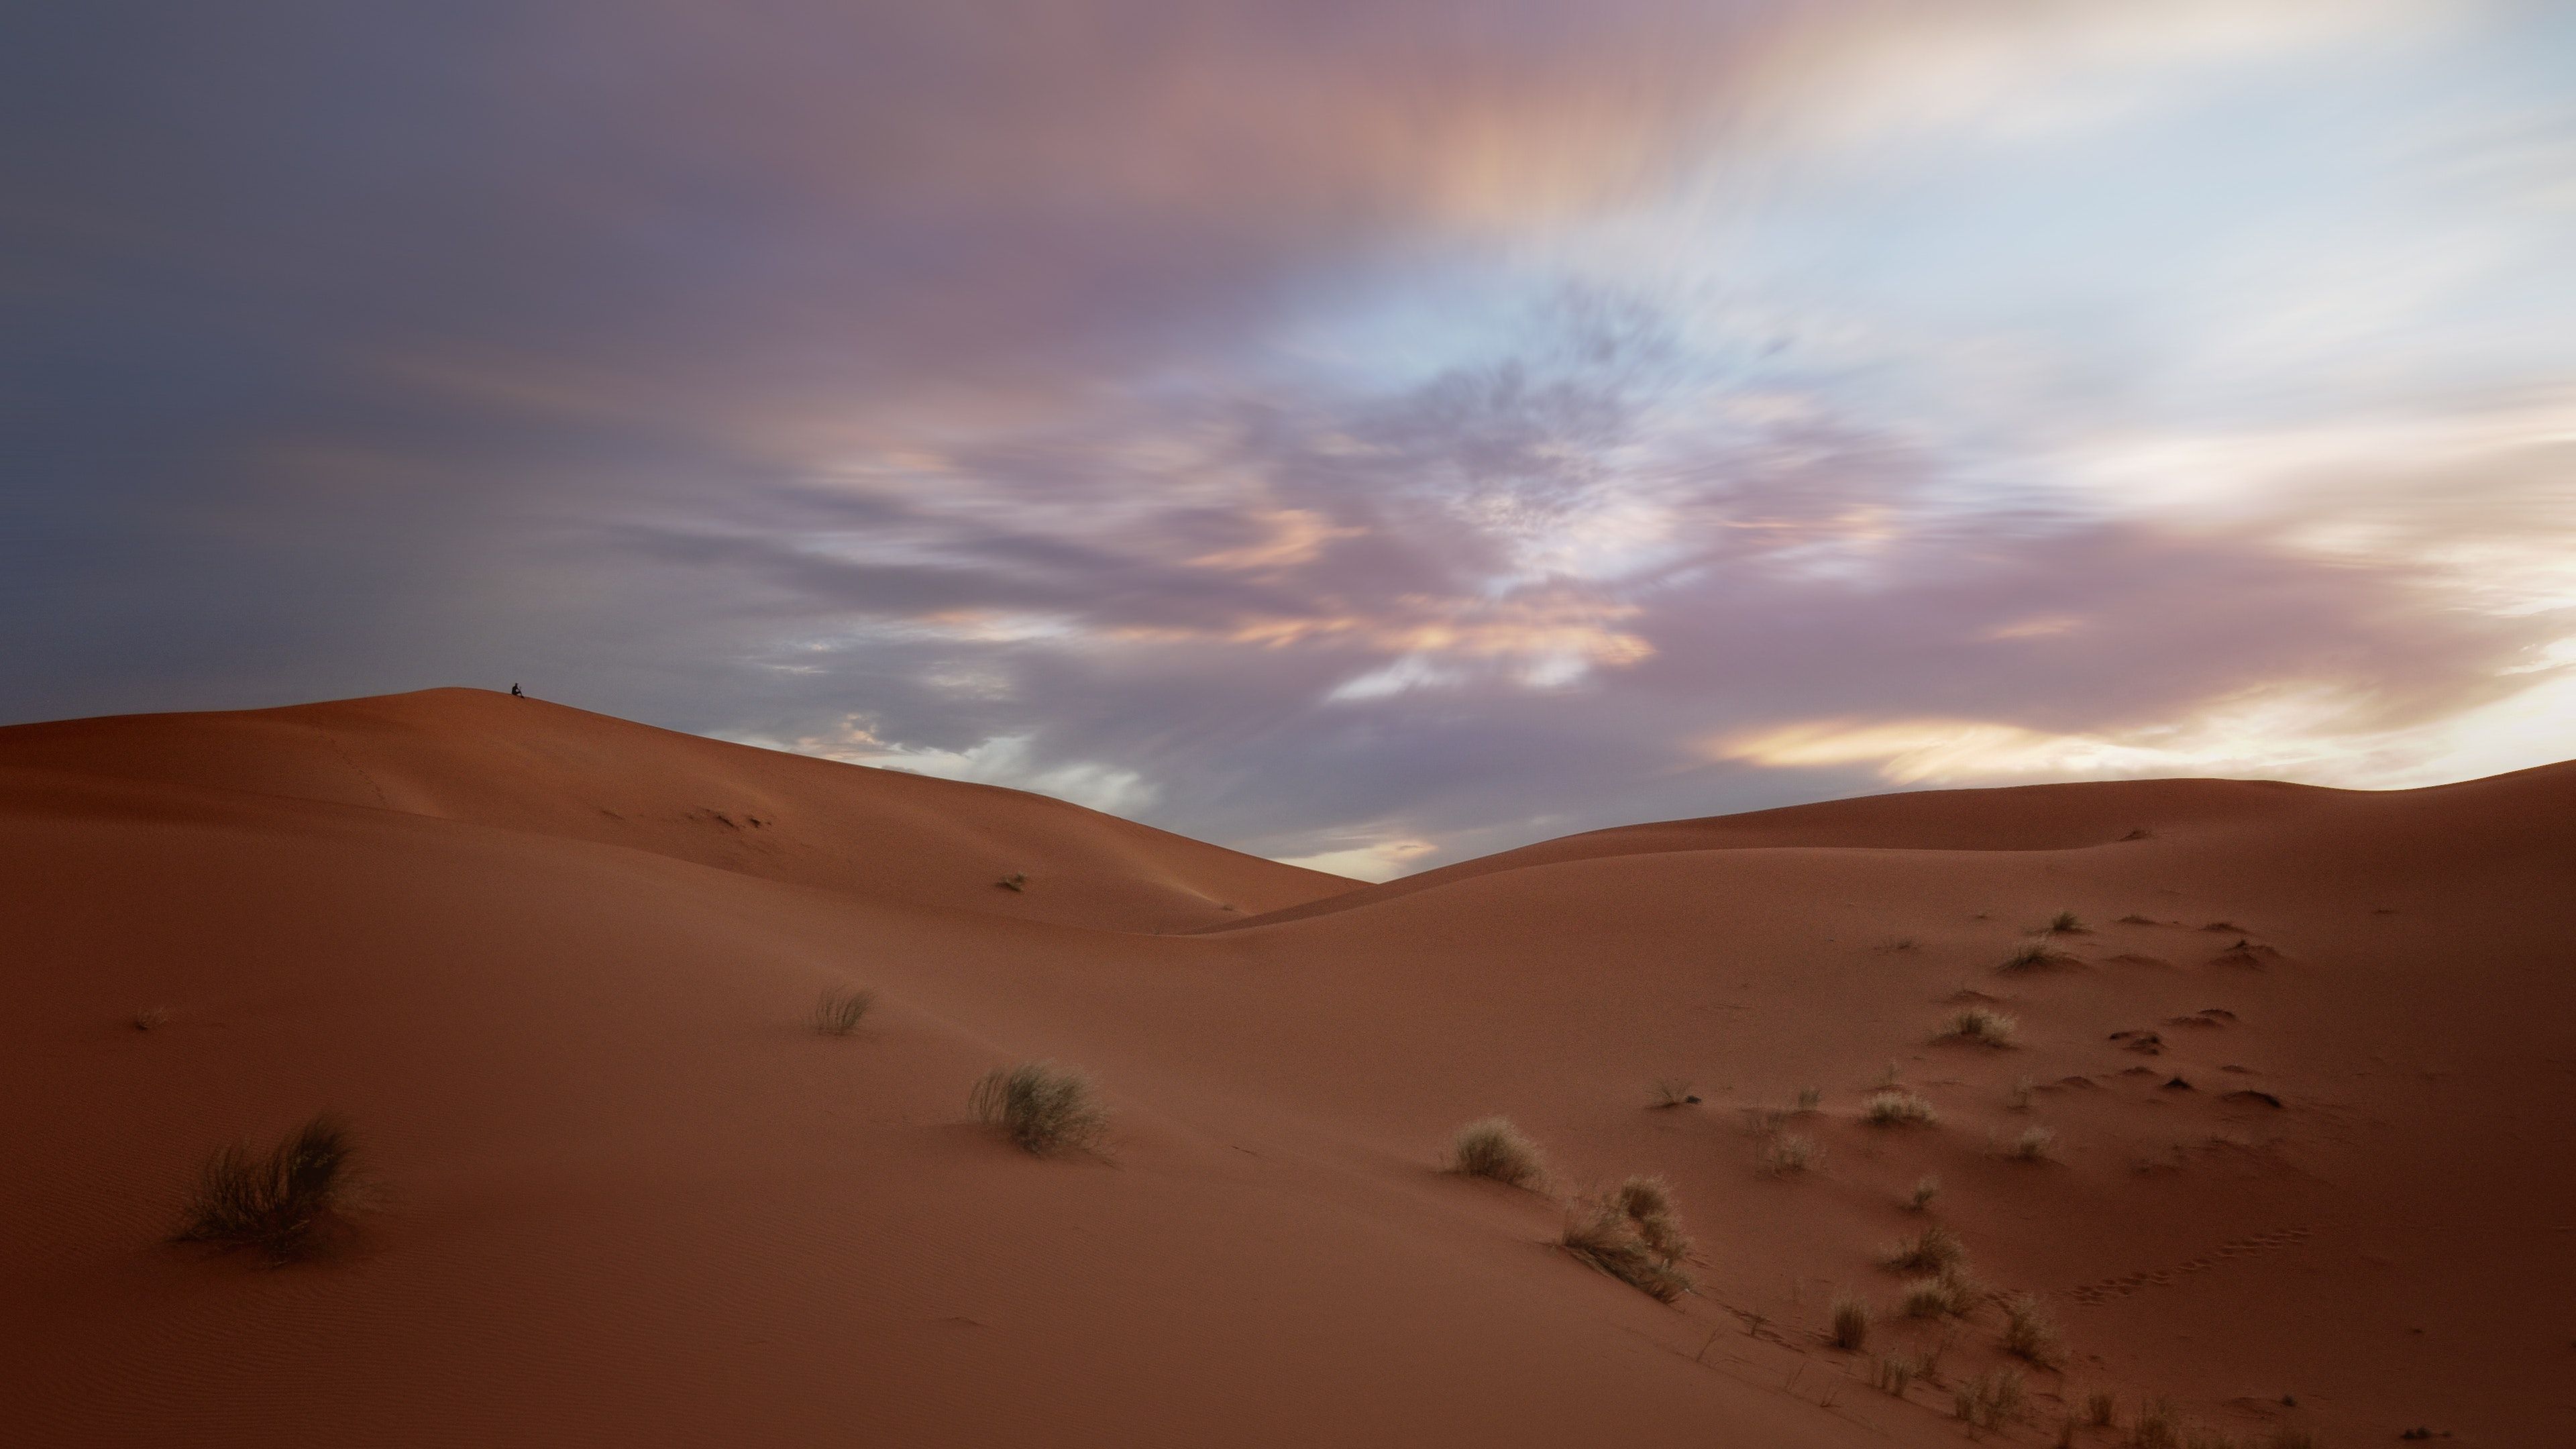 A desert with sand dunes and some clouds - Desert